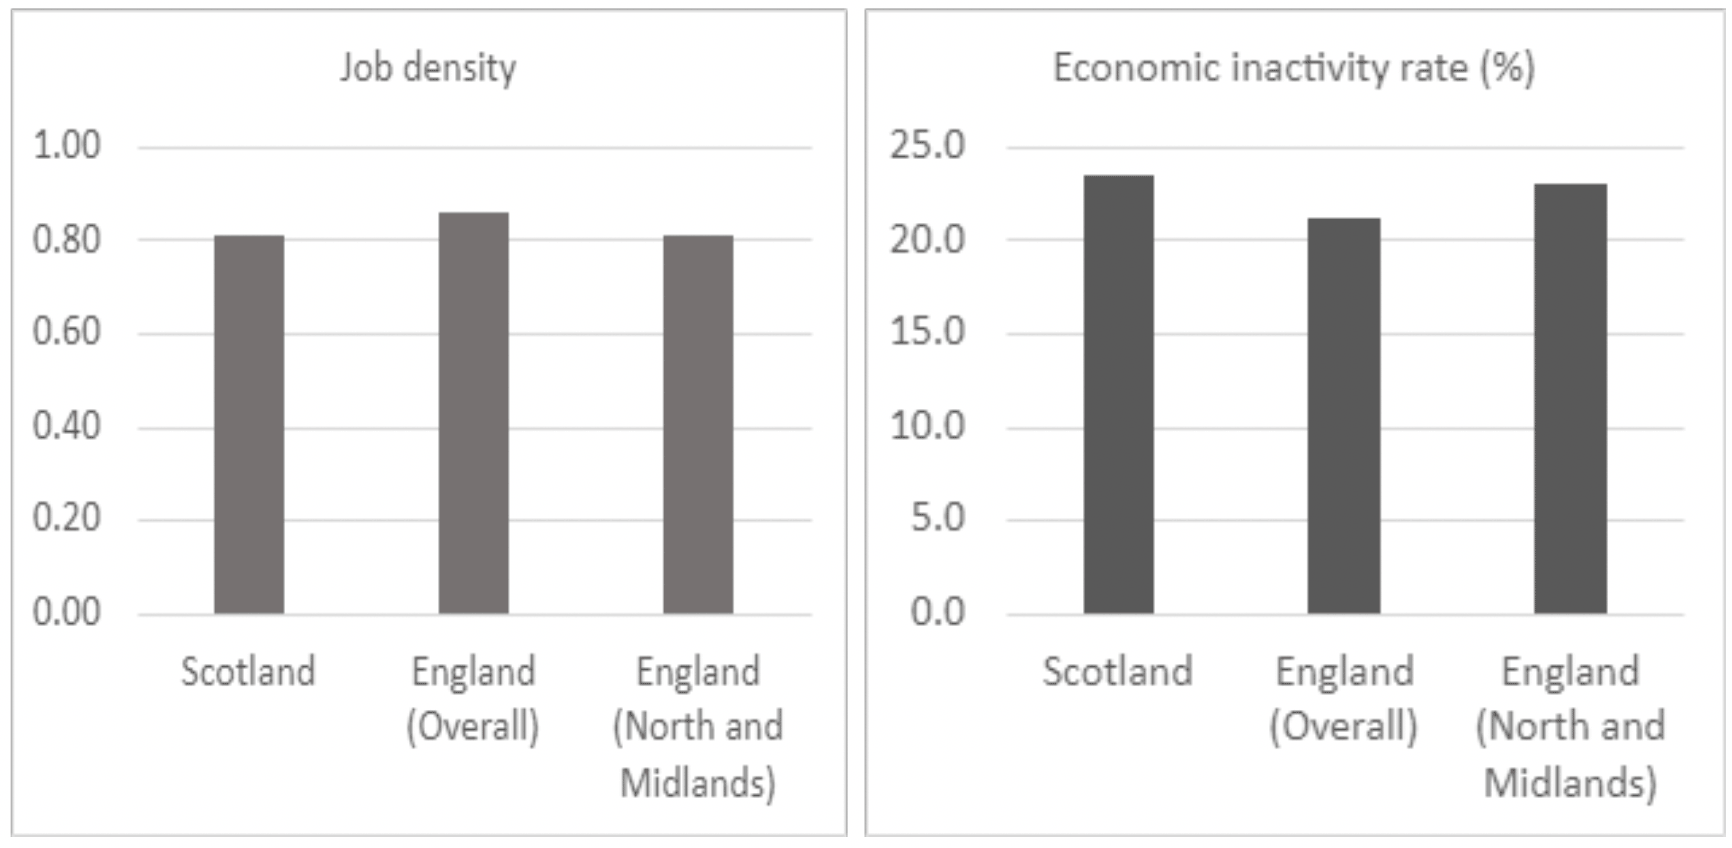 Bar chart showing the difference in mean economic job density between Scotland and England overall, and the similarity between Scotland and England’s North and Midland regions.